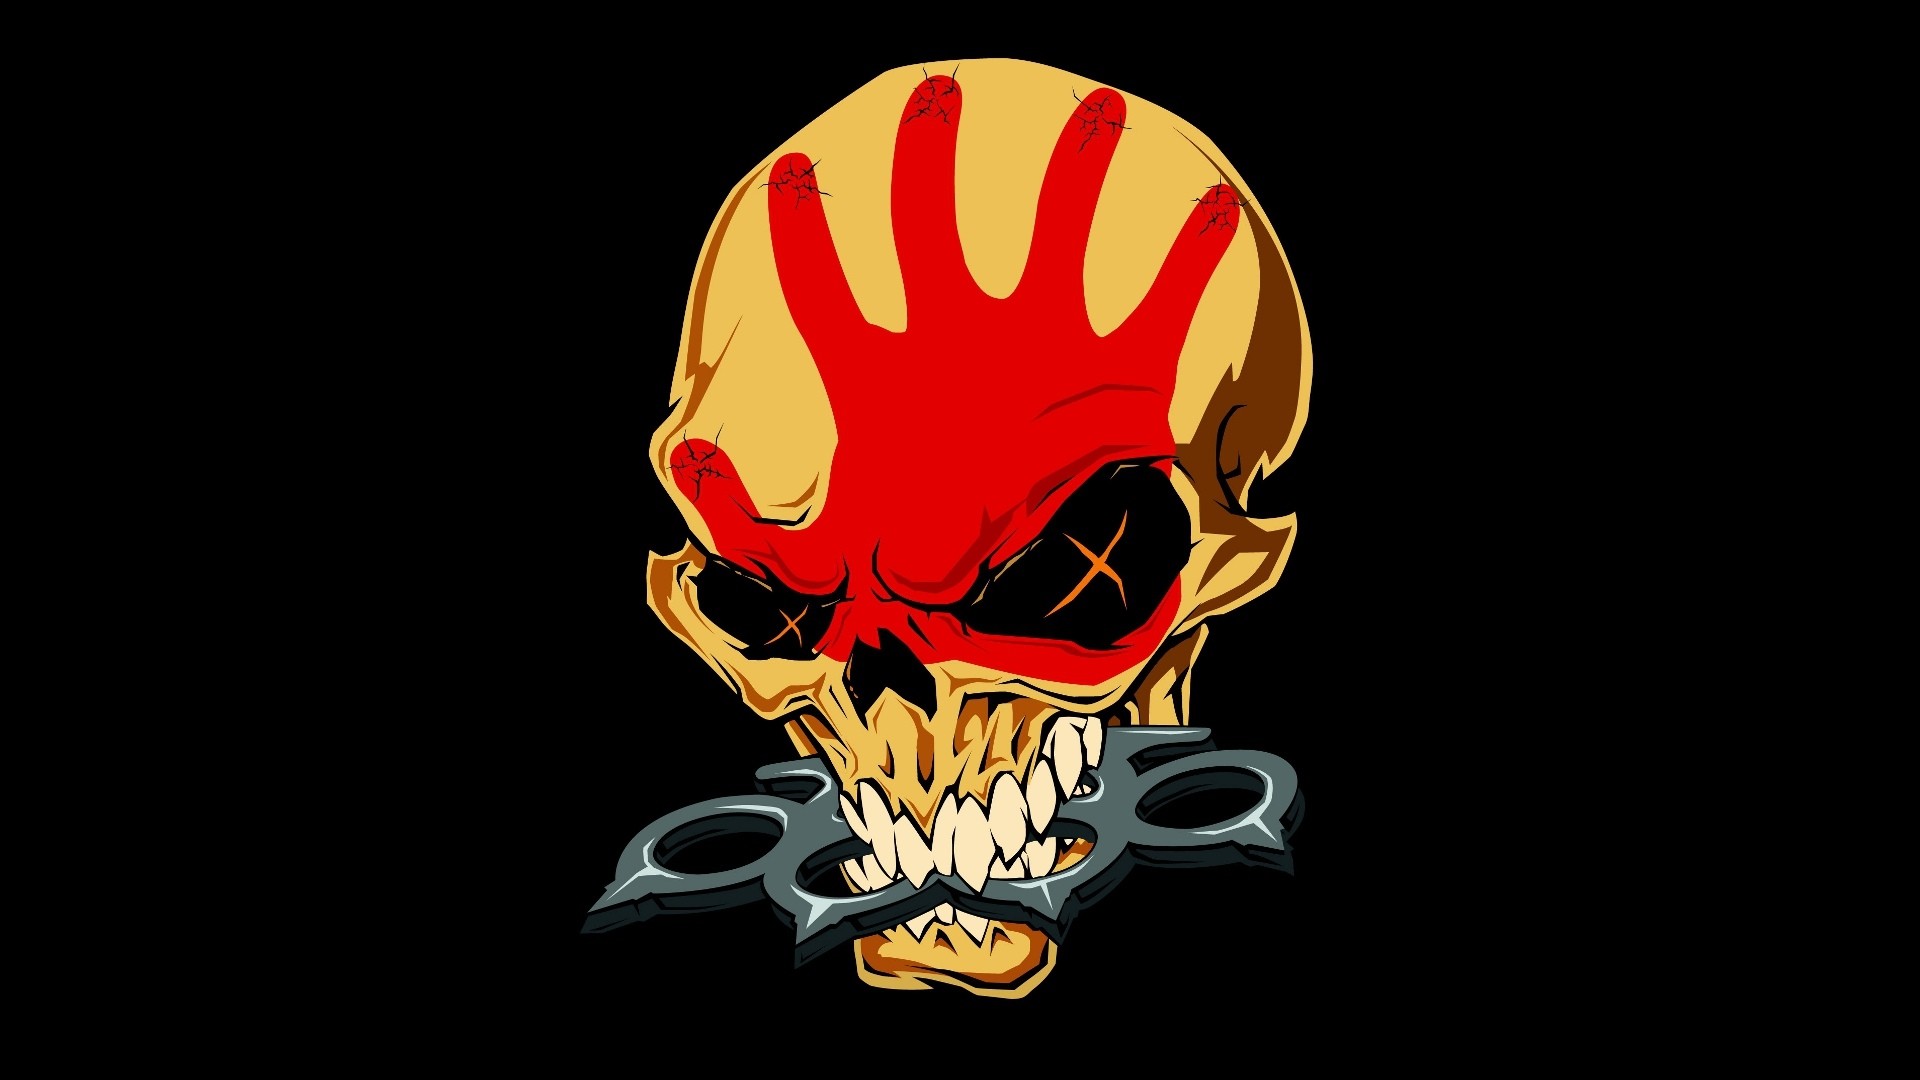 1920x1080 22 Five Finger Death Punch HD Wallpapers | Backgrounds - Wallpaper .